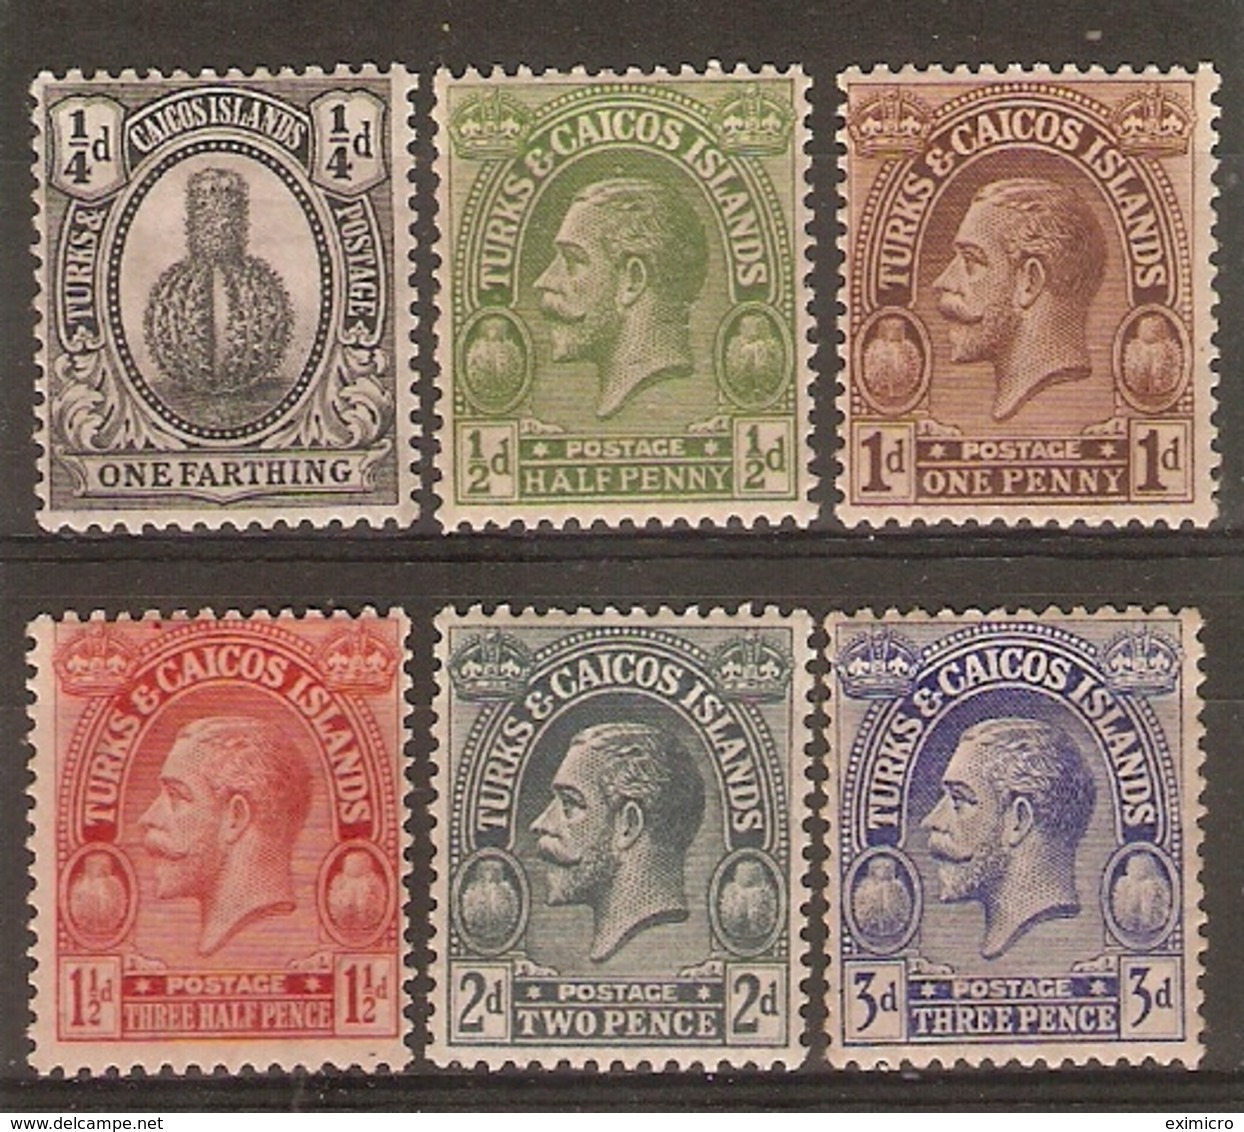 TURKS & CAICOS IS 1922 SET TO 2d + 3d SG 162/166 & 168 MOUNTED MINT Cat £17.50 - Turks And Caicos